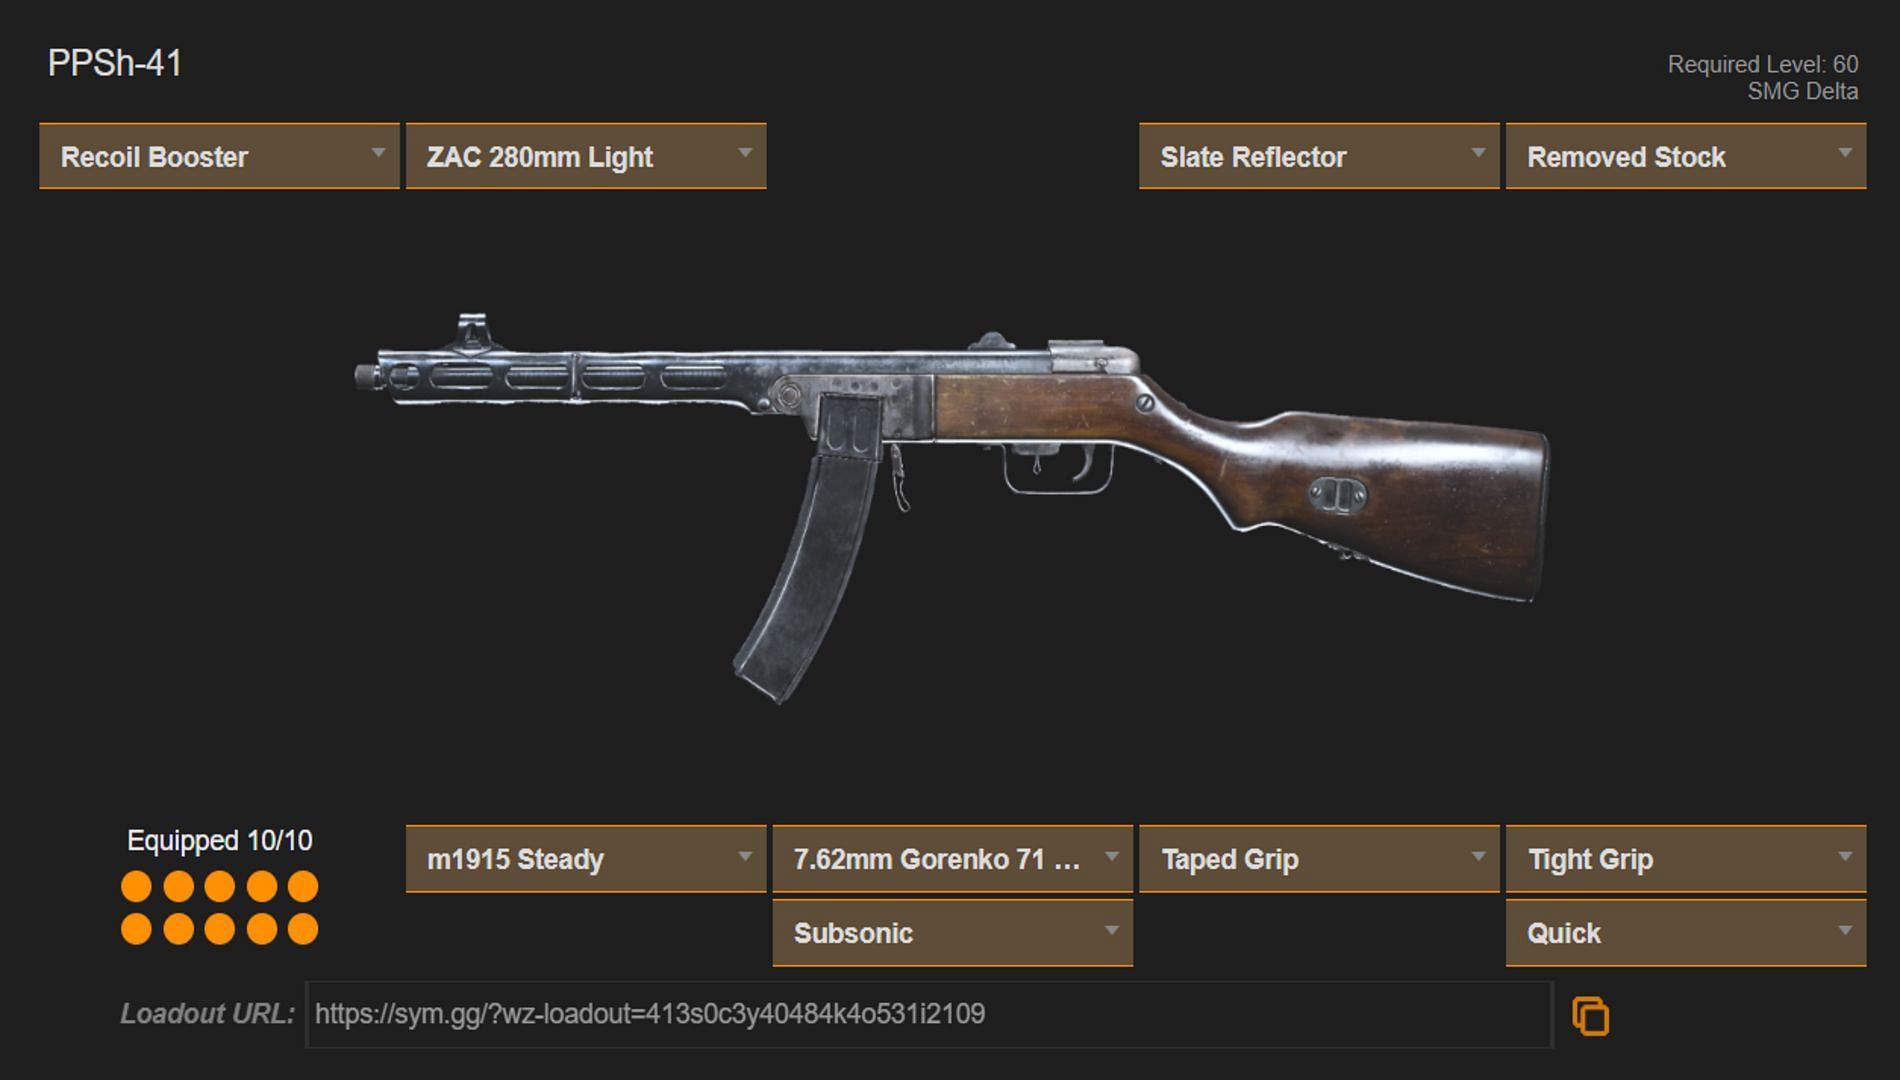 Call of Duty Warzone VG PPSh-41 loadout (Image via sym.gg)